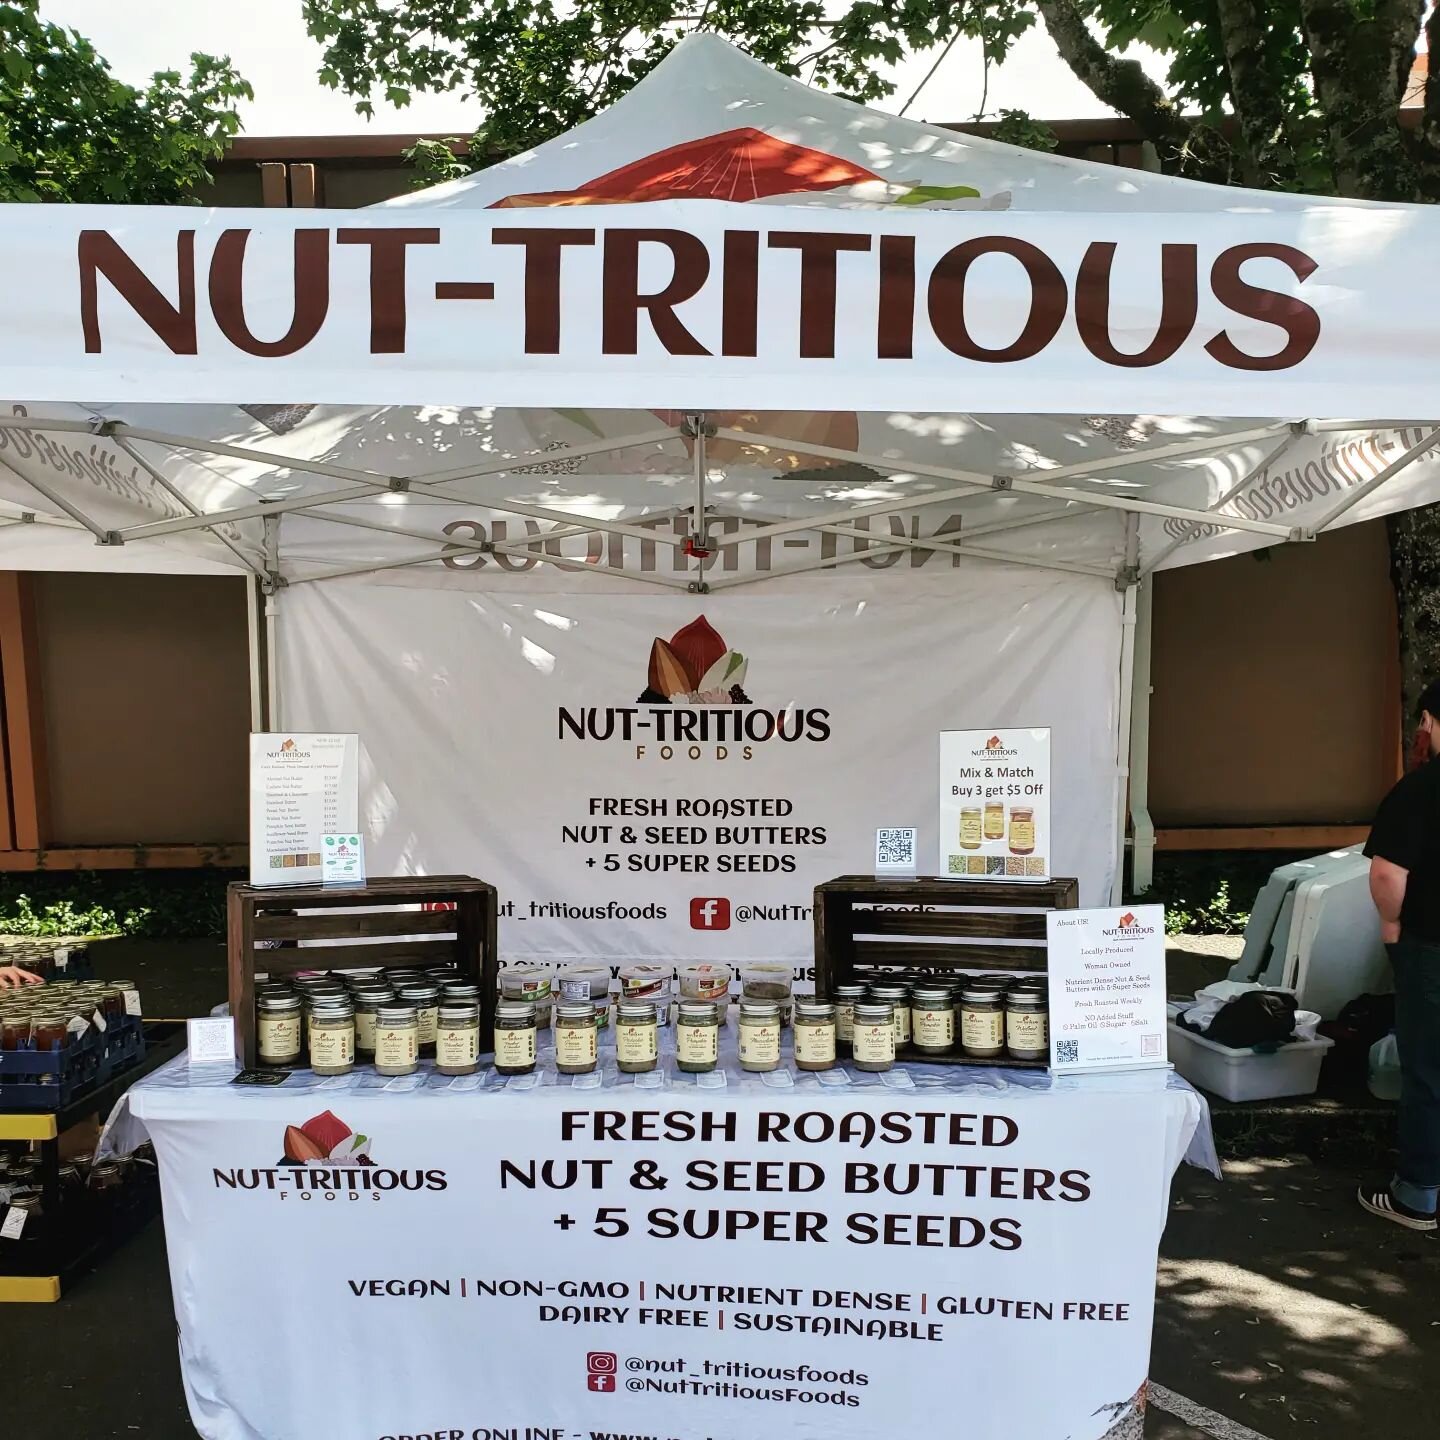 It's a beautiful day out! No better time to hit the markets as fresh new products come in.&nbsp; We have your nutrient dense nut and seed butters available in Lake Oswego from 8:30am to 1:30pm, in Beaverton from 8:30am to 1:30pm, and Vancouver on Sat